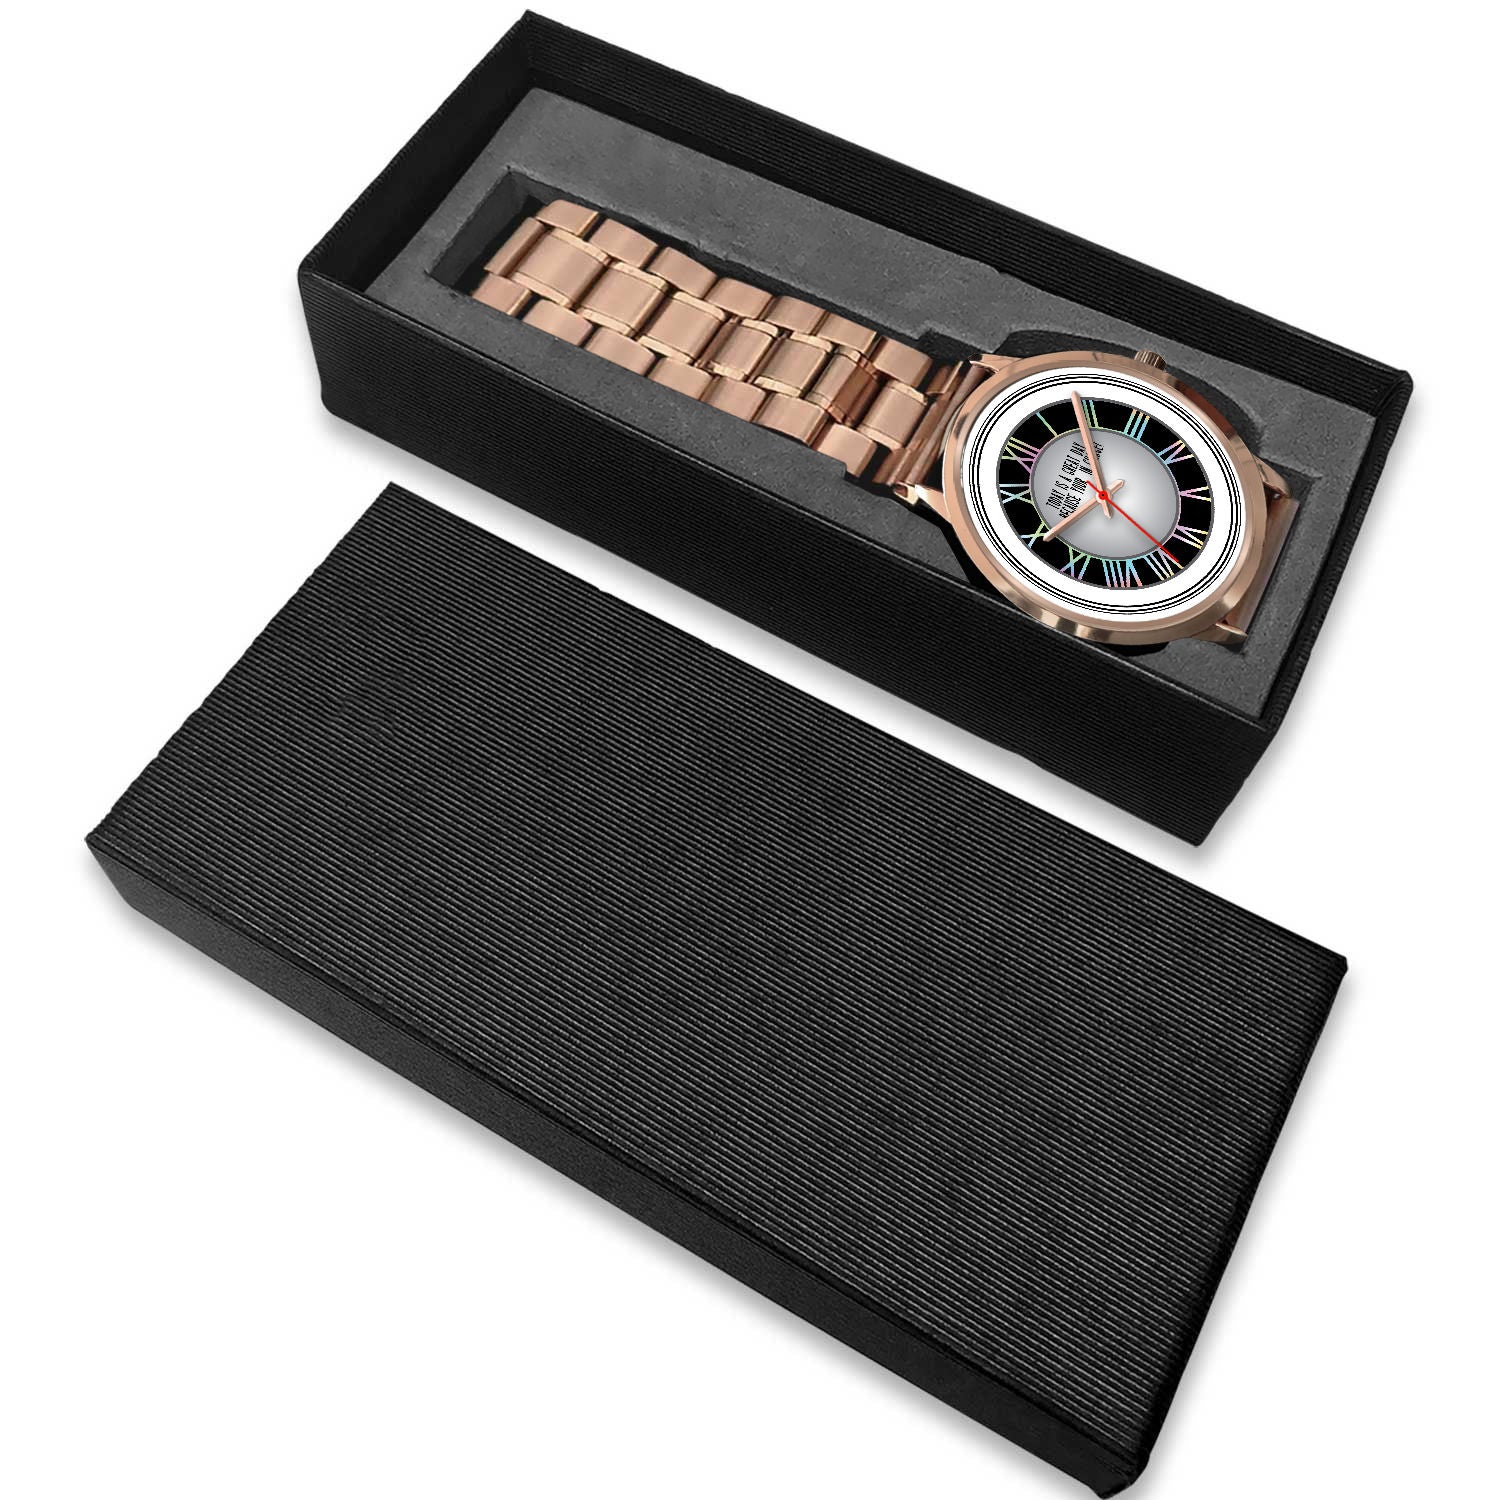 Today is A Good Day Because Your In Charge Rose Gold Watch Band Options-Rose Gold Watch-Digital Rawness